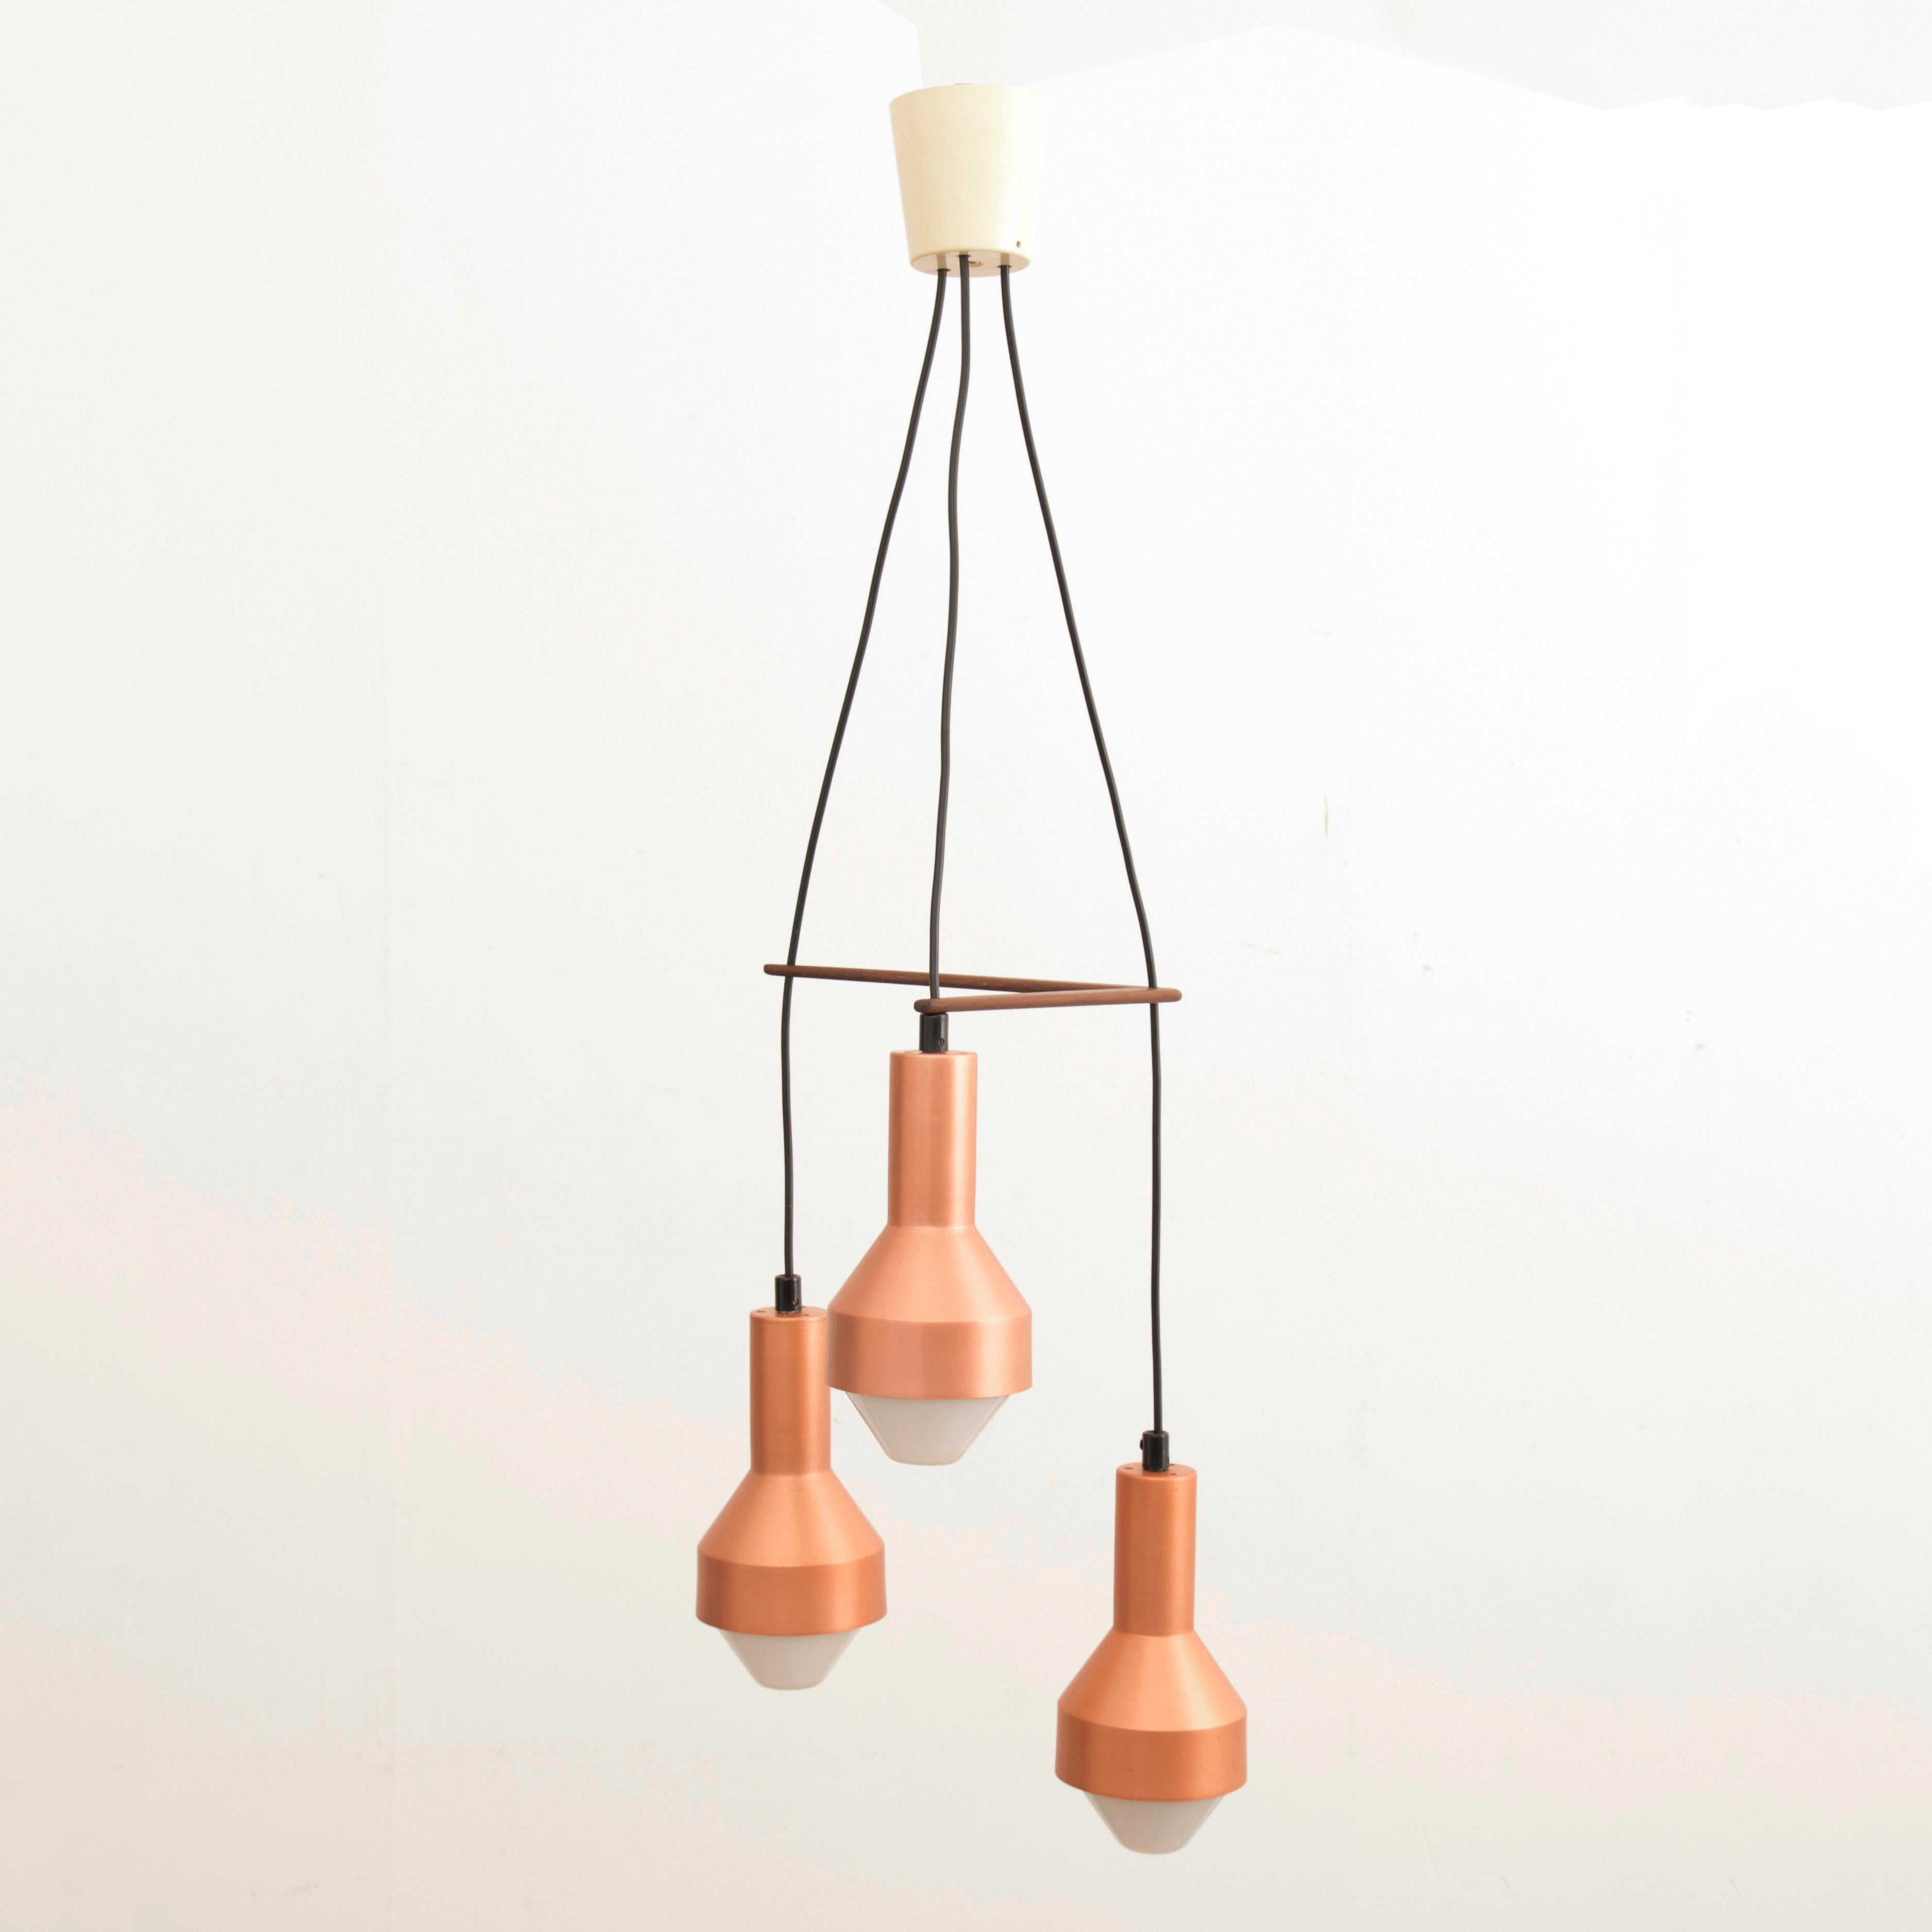 A mid-century three tier pendant comprising Idman K2-133 copper anodised shades with a teak boomerang holder designed by Tapio Wirkkala. Wirkkala designed a collection of lights for Idman Oy, Finland, circa 1959 - 1961. 

Dimensions: 32 W x 32 D x